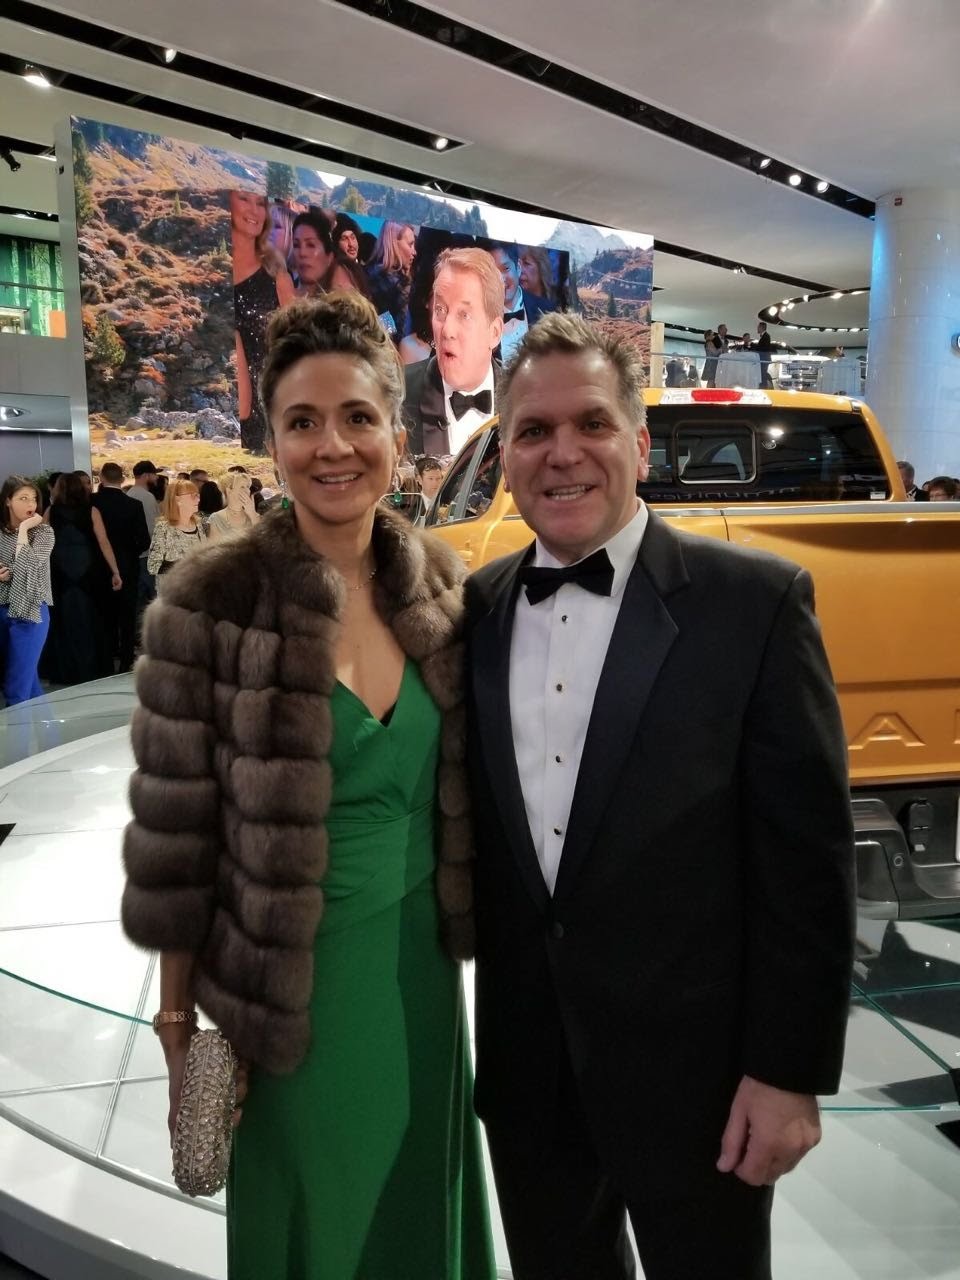 Vanessa Moriel, Managing Director Asia Pacific, LIASE Group and John Bukowicz, Managing Director Americas, LIASE Group at the new Ford Ranger’s booth.